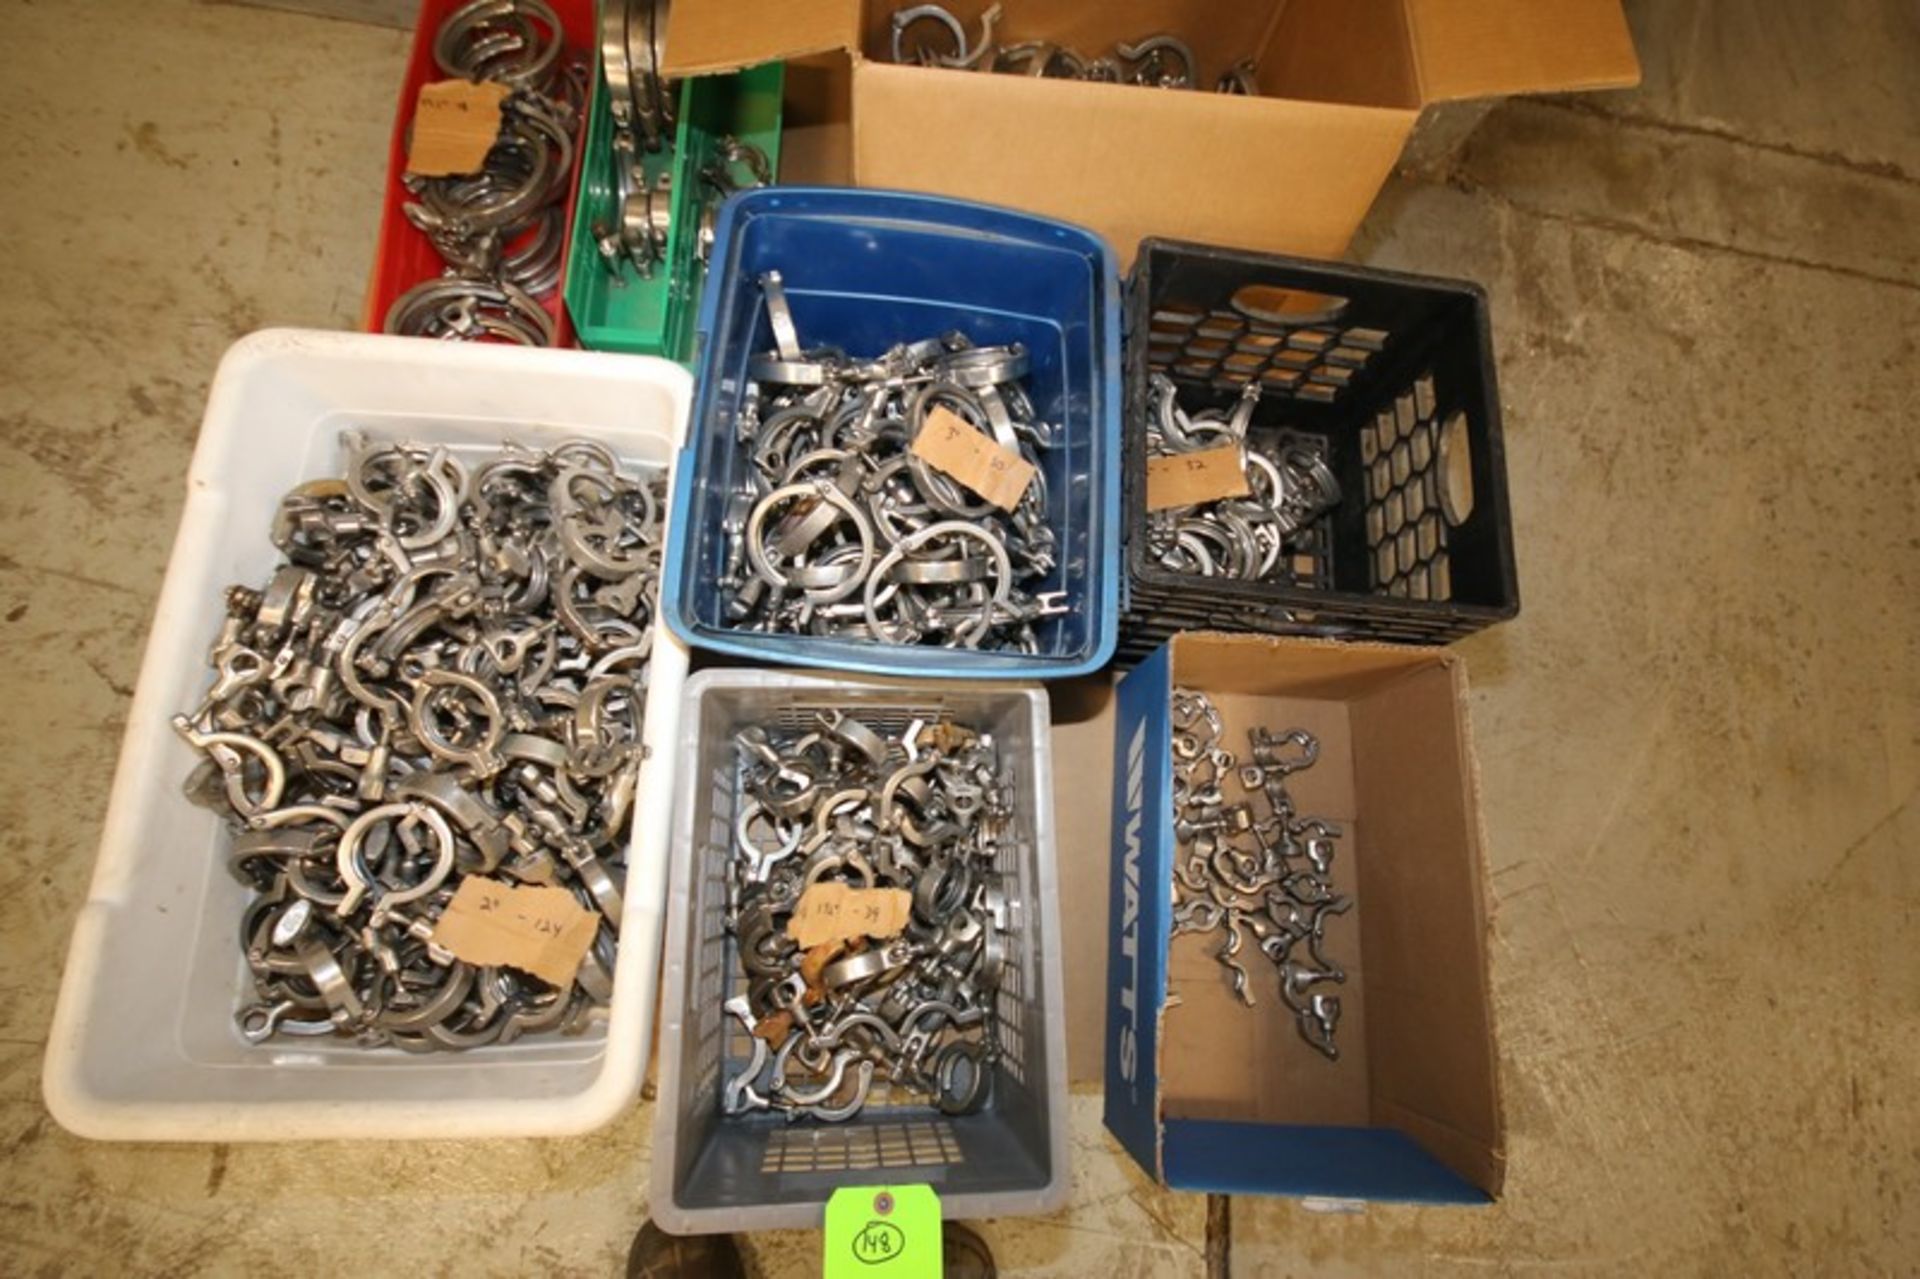 Aprox. 300 - 1", 1.5", 2.5", 3" & 4" Assorted S/S Clamps, Includes a Box Broke or Missing Parts - Image 2 of 3